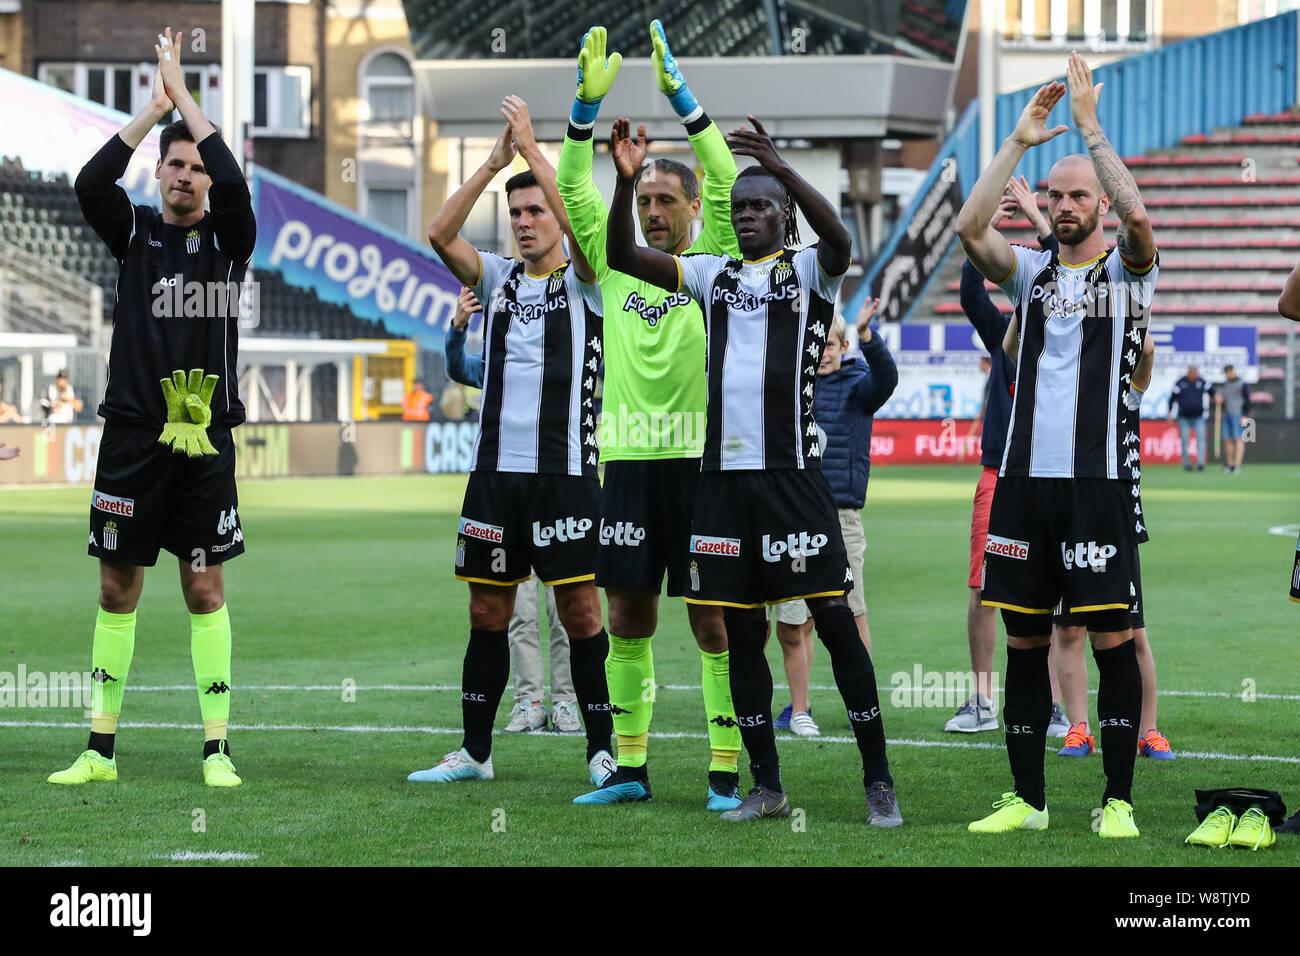 Charleroi, Belgium. 11th Aug, 2019.Players of Sporting Charleroi celebrates  with fans after winning the Jupiler Pro League match day 3 between Sporting  Charleroi and Royal Antwerp Fc on August 11, 2019 in